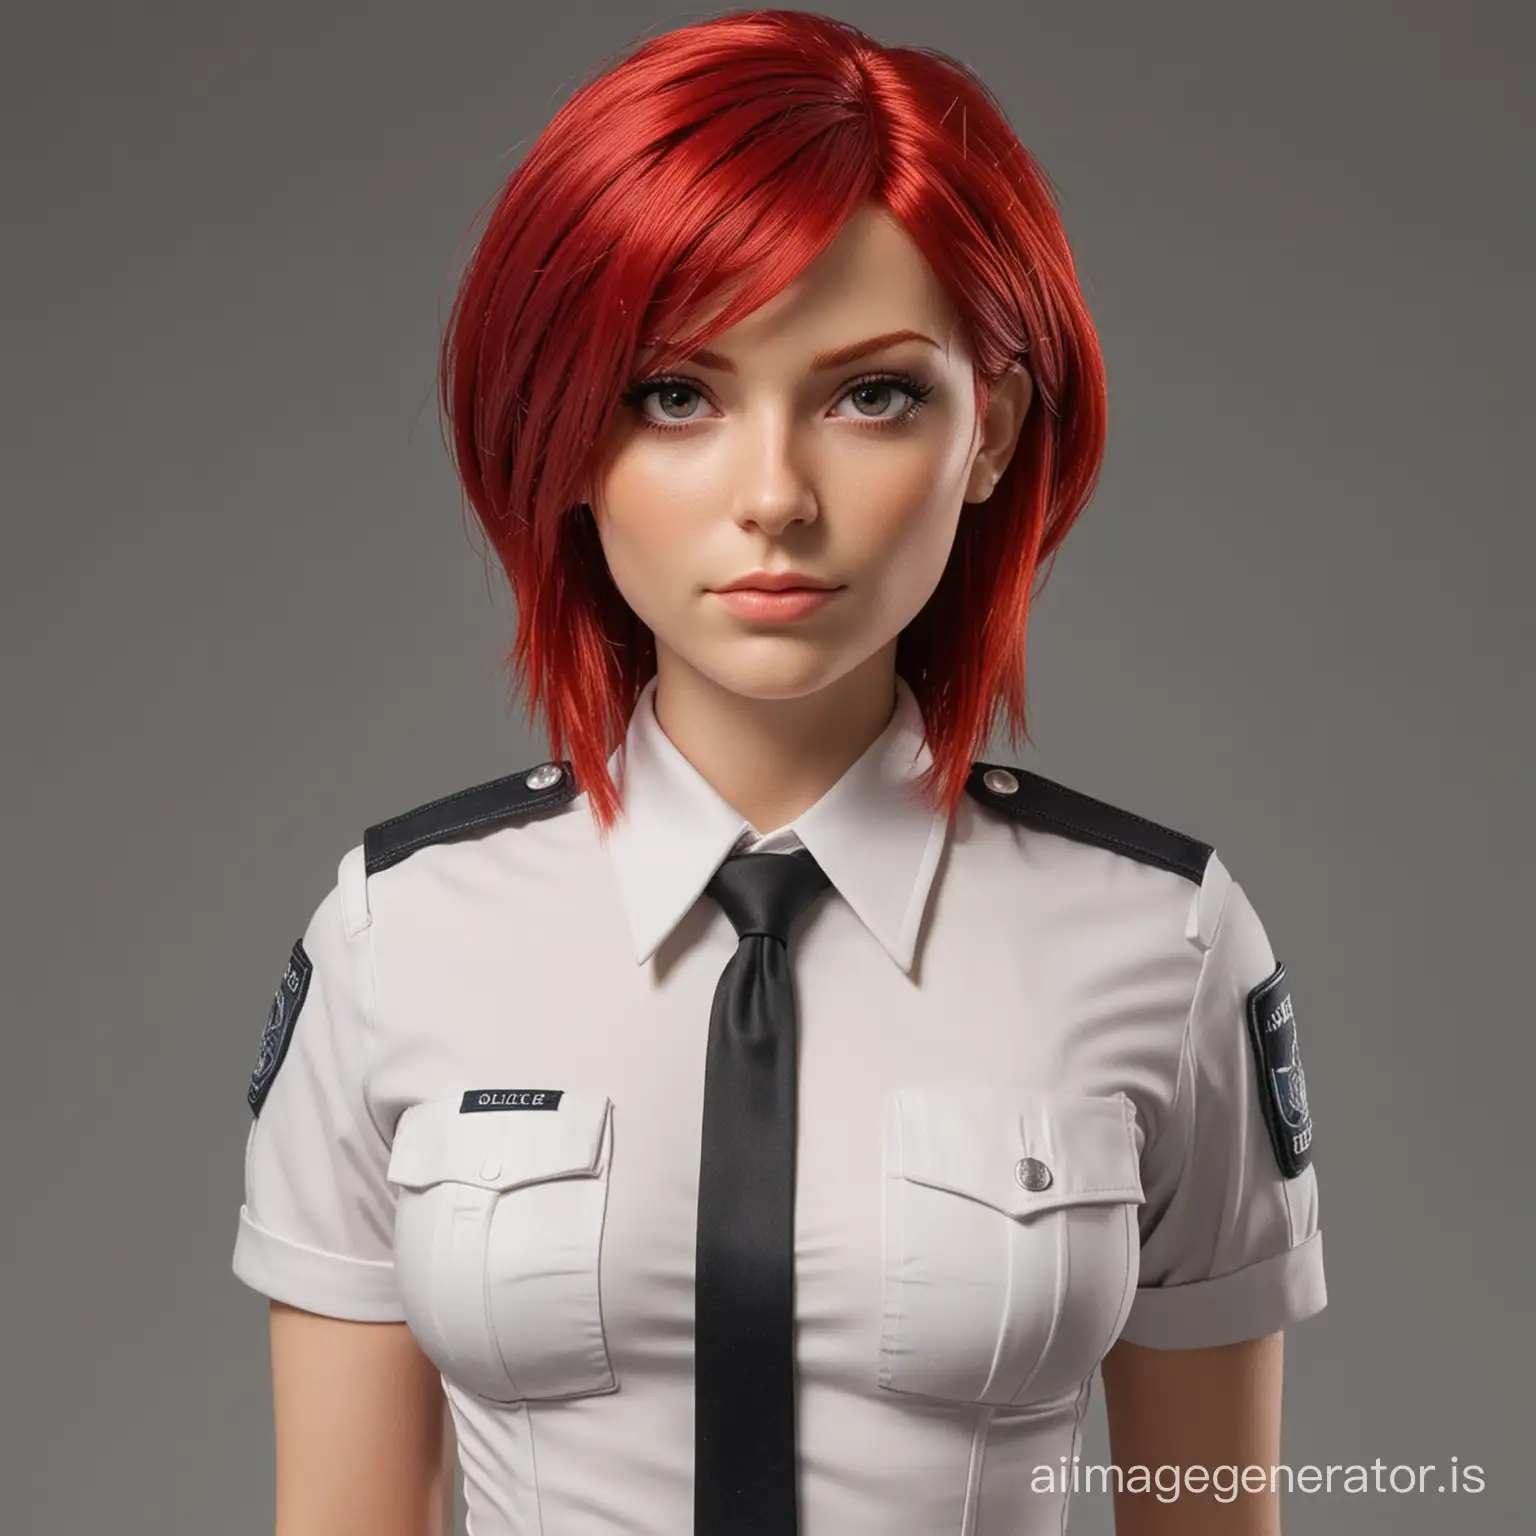 Striking-Female-Police-Officer-with-Blood-Red-Hair-and-Impressive-Physique